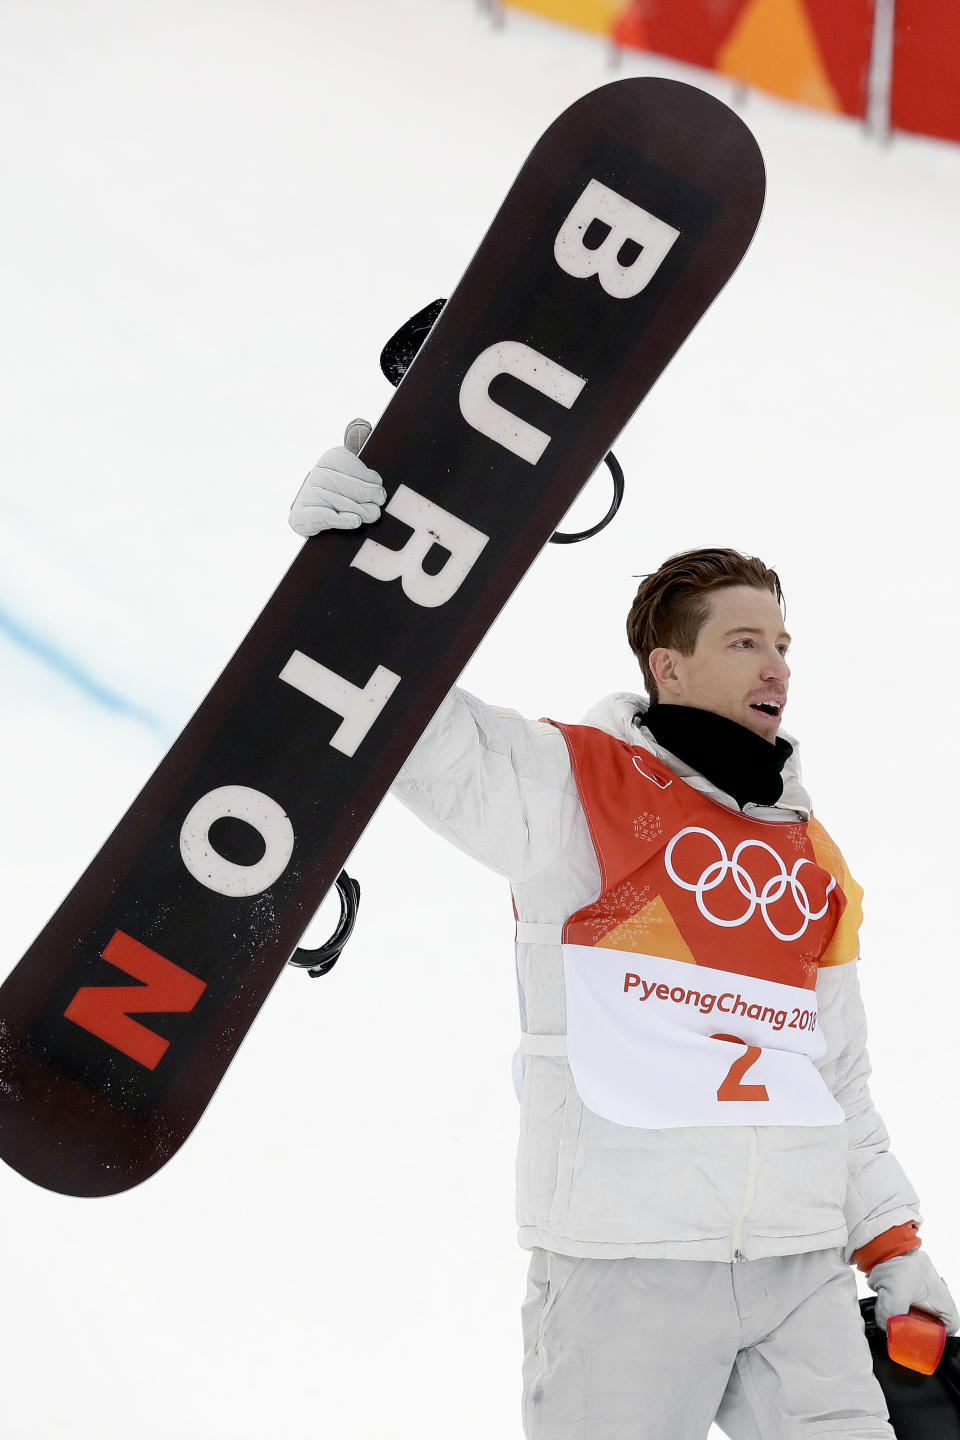 FILE - In this Feb. 14, 2018, file photo, Shaun White, of the United States, holds up his Burton snowboard as he celebrates his run during the men's halfpipe finals at the 2018 Winter Olympics in Pyeongchang, South Korea. Jake Burton Carpenter, the man who changed the game on the mountain by fulfilling a grand vision of what a snowboard could be, died Wednesday night, Nov. 20, 2019, of complications stemming from a relapse of testicular cancer. He was 65. (AP Photo/Gregory Bull, File)